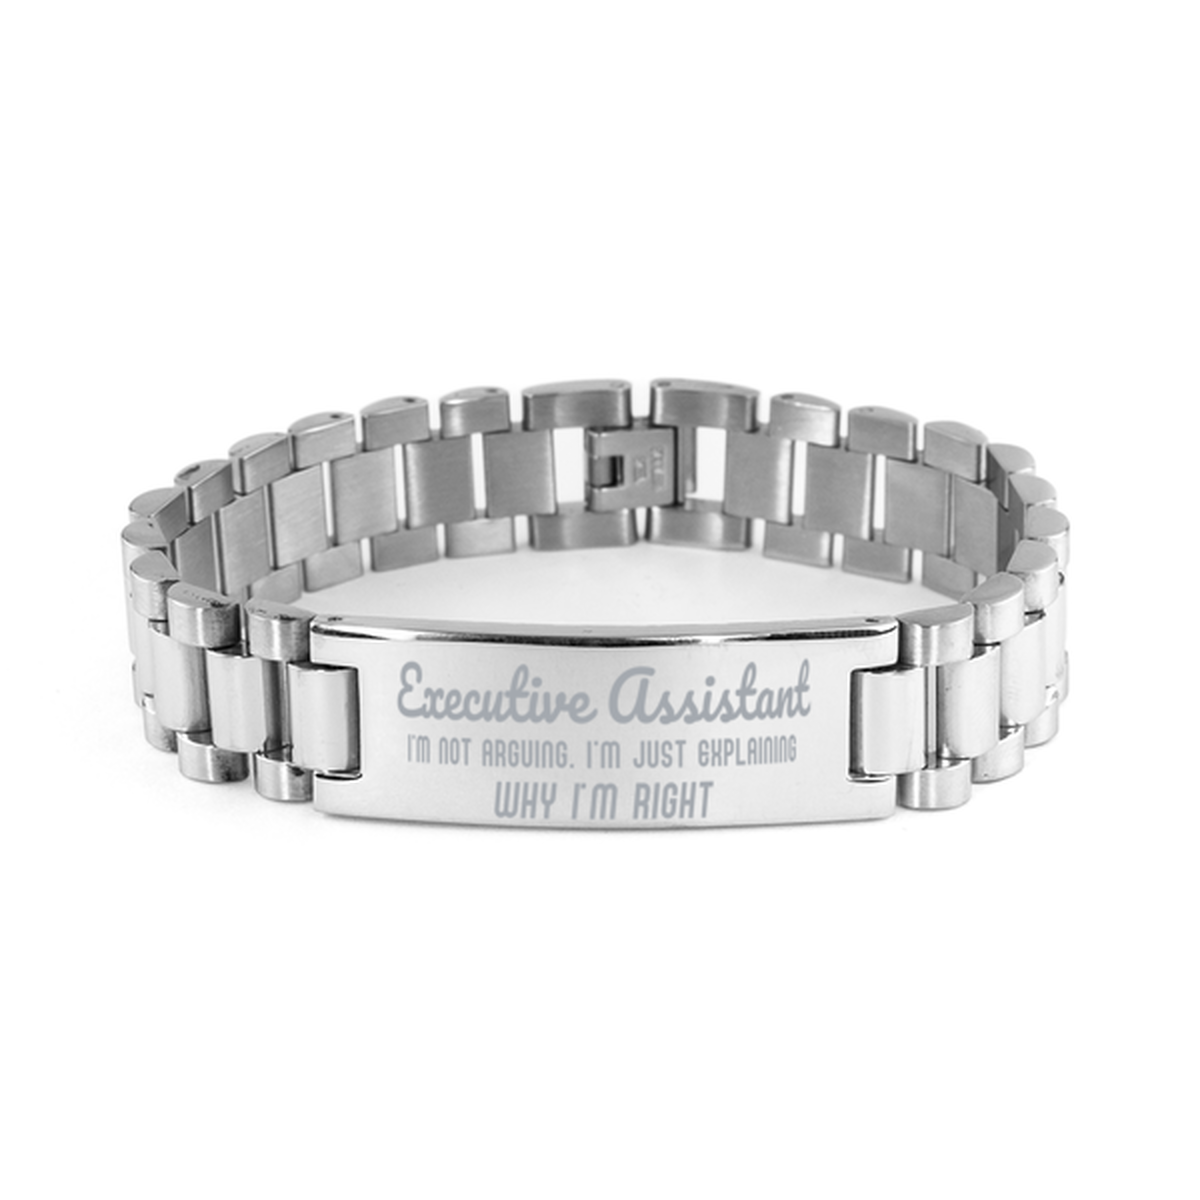 Executive Assistant I'm not Arguing. I'm Just Explaining Why I'm RIGHT Ladder Stainless Steel Bracelet, Graduation Birthday Christmas Executive Assistant Gifts For Executive Assistant Funny Saying Quote Present for Men Women Coworker